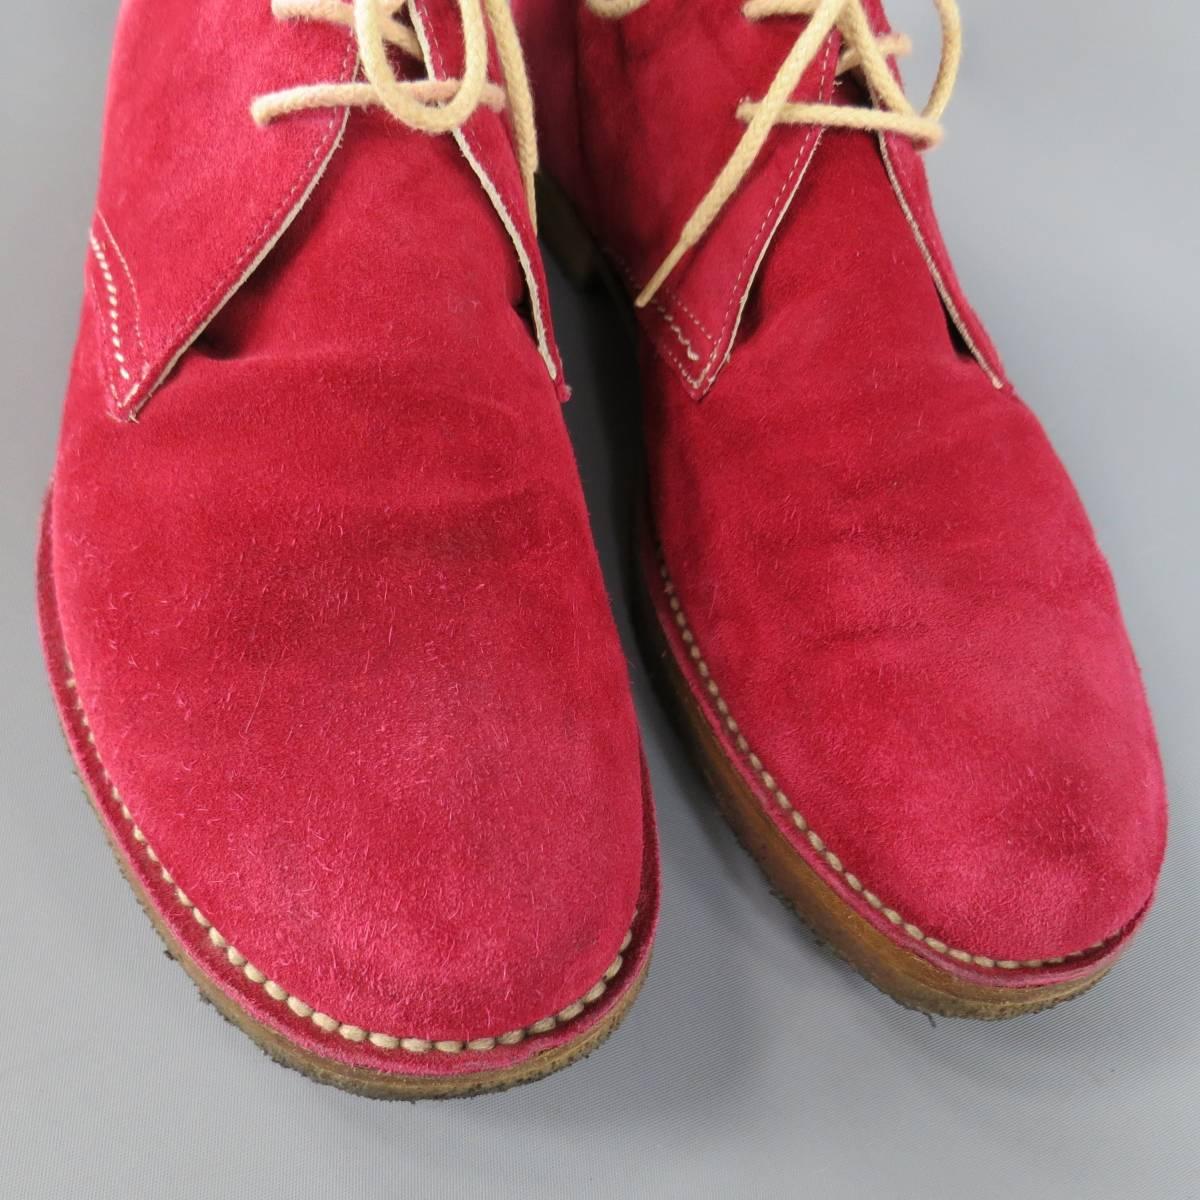 Rich red suede JIL SANDER chukkah boots with beige laces and split crepe sole.Made in Italy.
 
Fair Pre-Owned Condition.
Marked: UK 7
 
Outsole: 11.25 x 4 in.